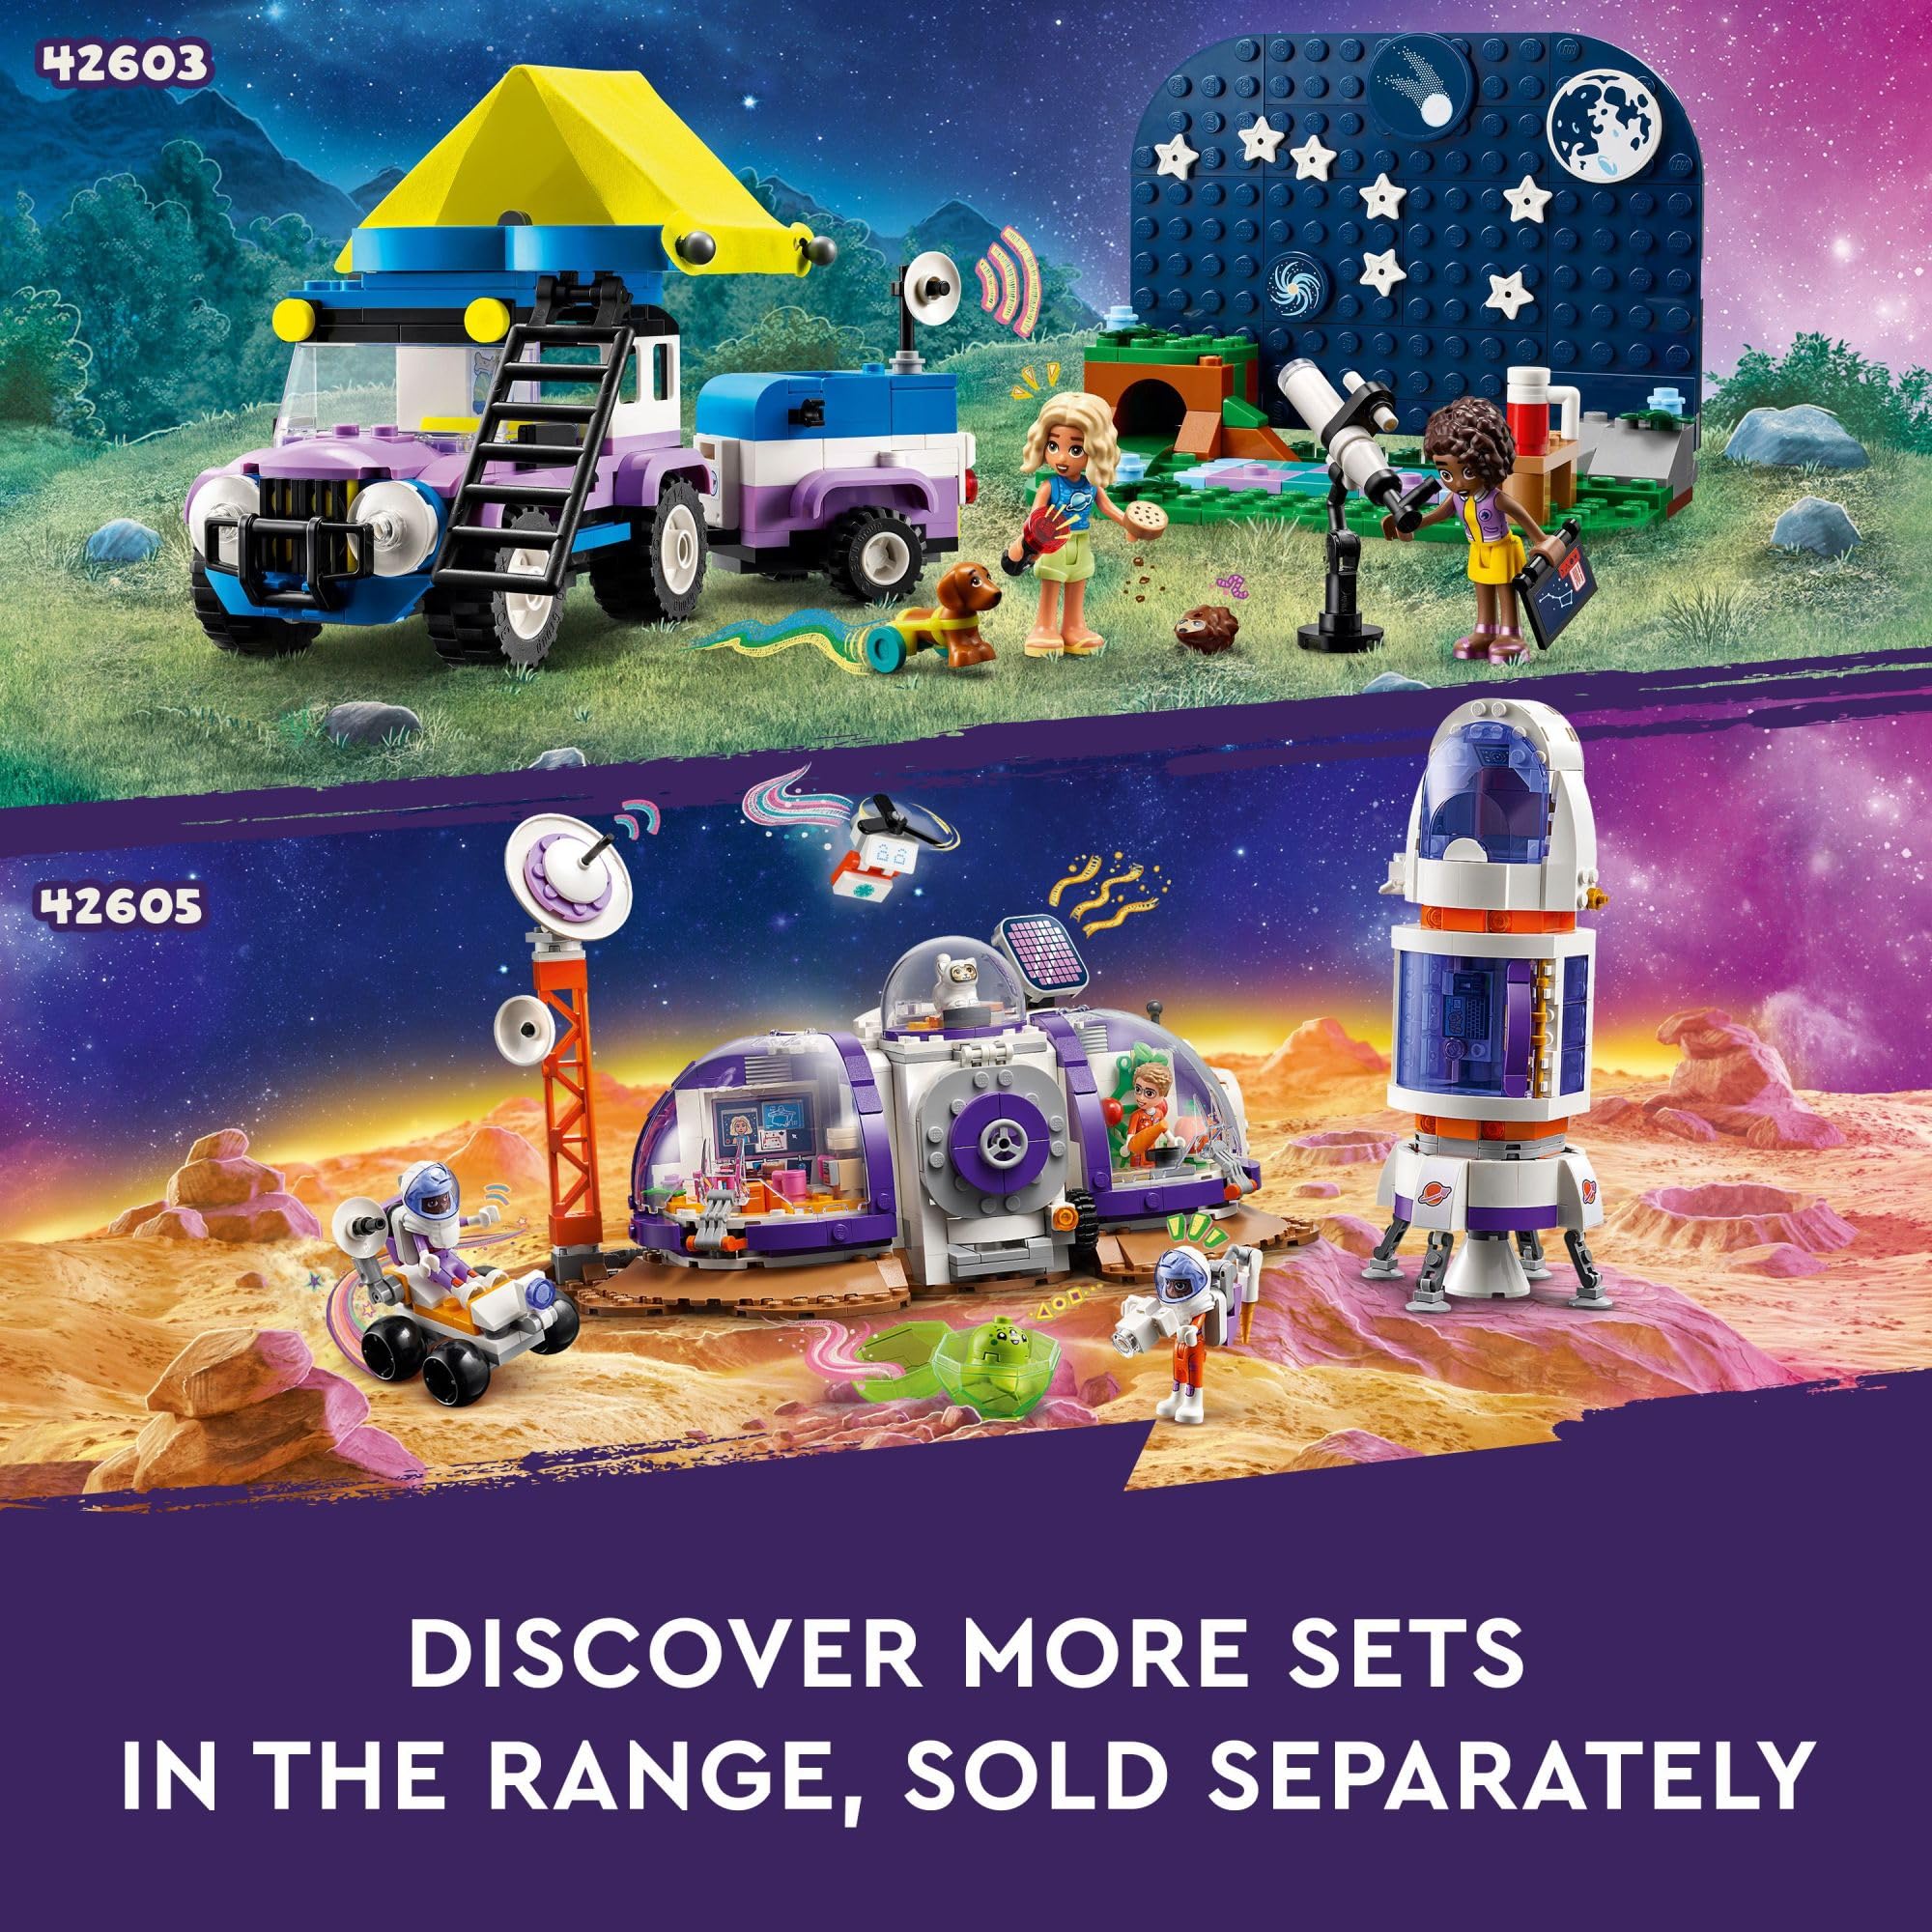 LEGO Friends Stargazing Camping Vehicle Adventure Toy, Includes 2 Mini-Dolls, Camping Trailer, Telescope Toy, and a Dog Figure, Science Toy Gift Idea for Girls, Boys and Kids Ages 7 and Up, 42603